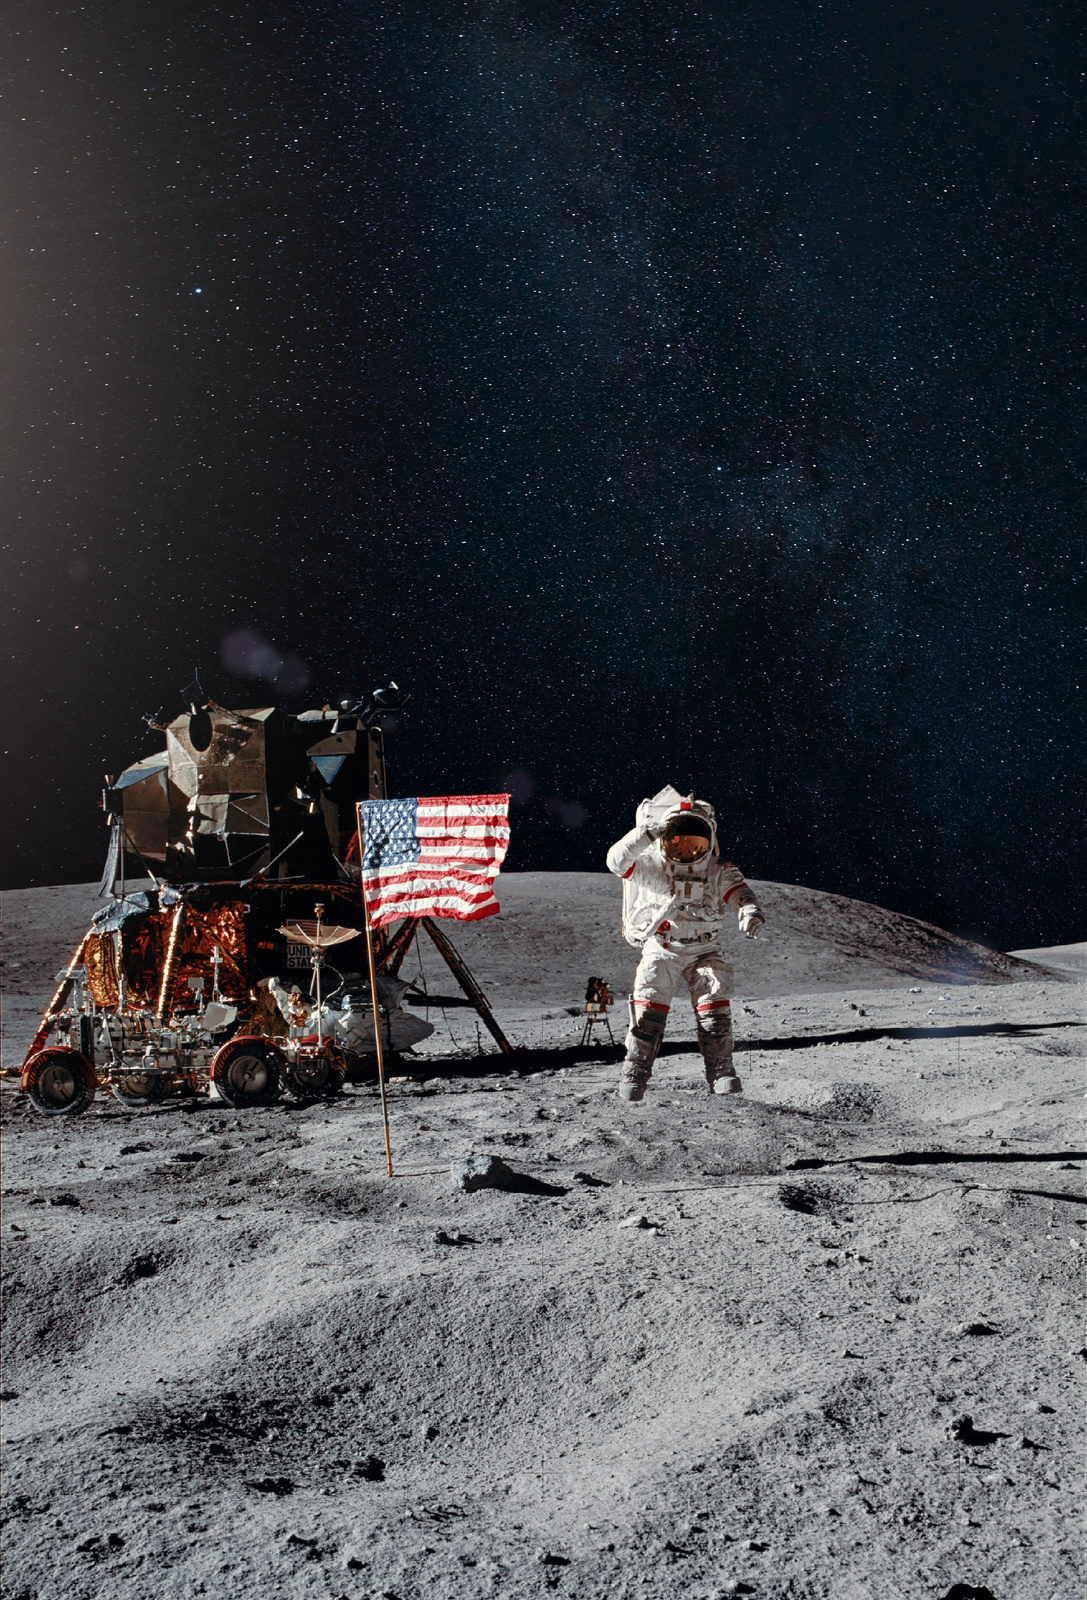 Man on the Moon. Astronaut on Lunar (Moon) Landing Mission. Elements of This Image Furnished by NASA.